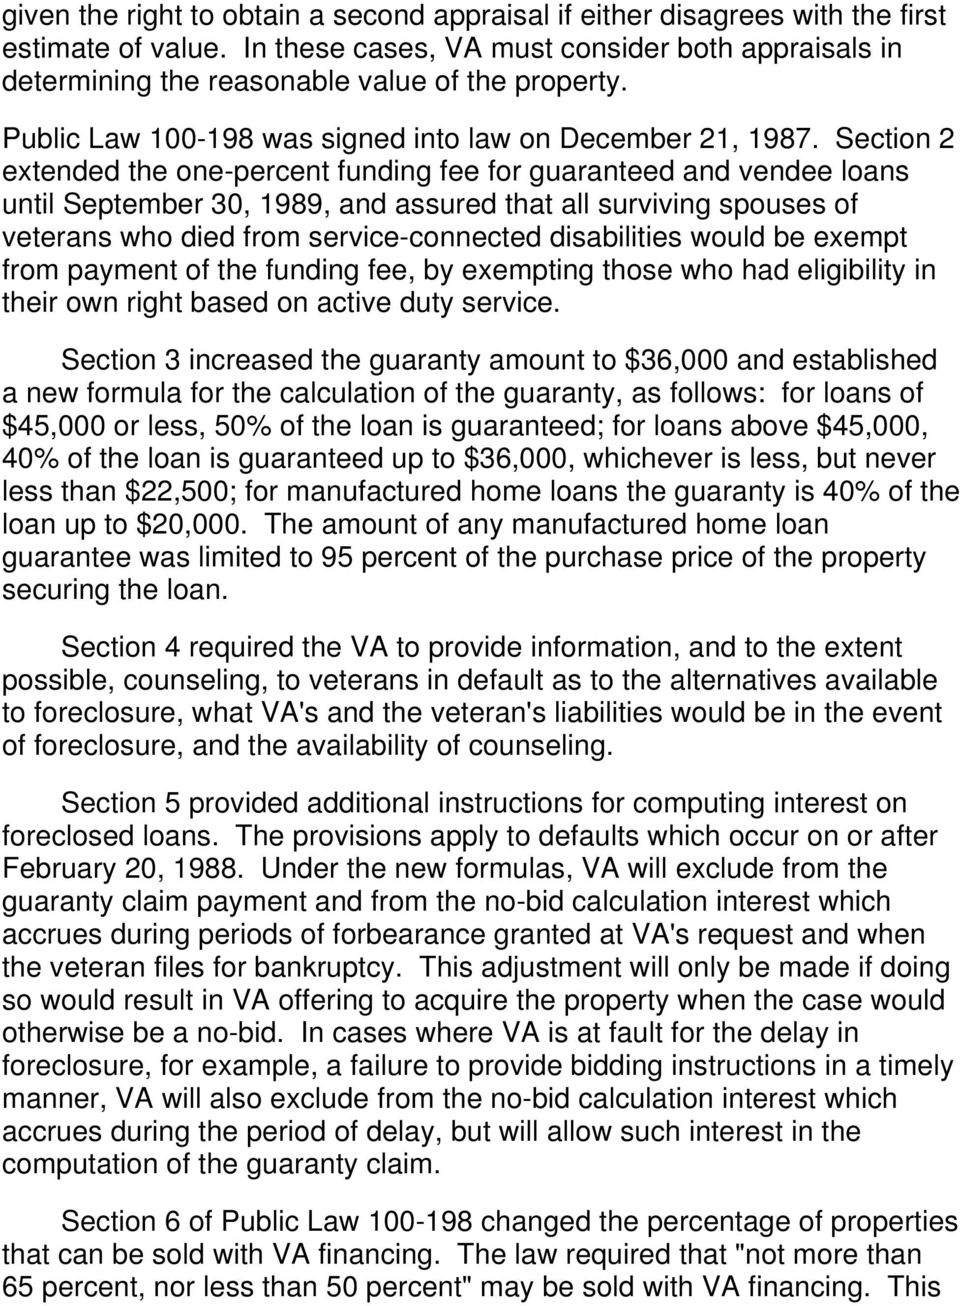 Section 2 extended the one-percent funding fee for guaranteed and vendee loans until September 30, 1989, and assured that all surviving spouses of veterans who died from service-connected